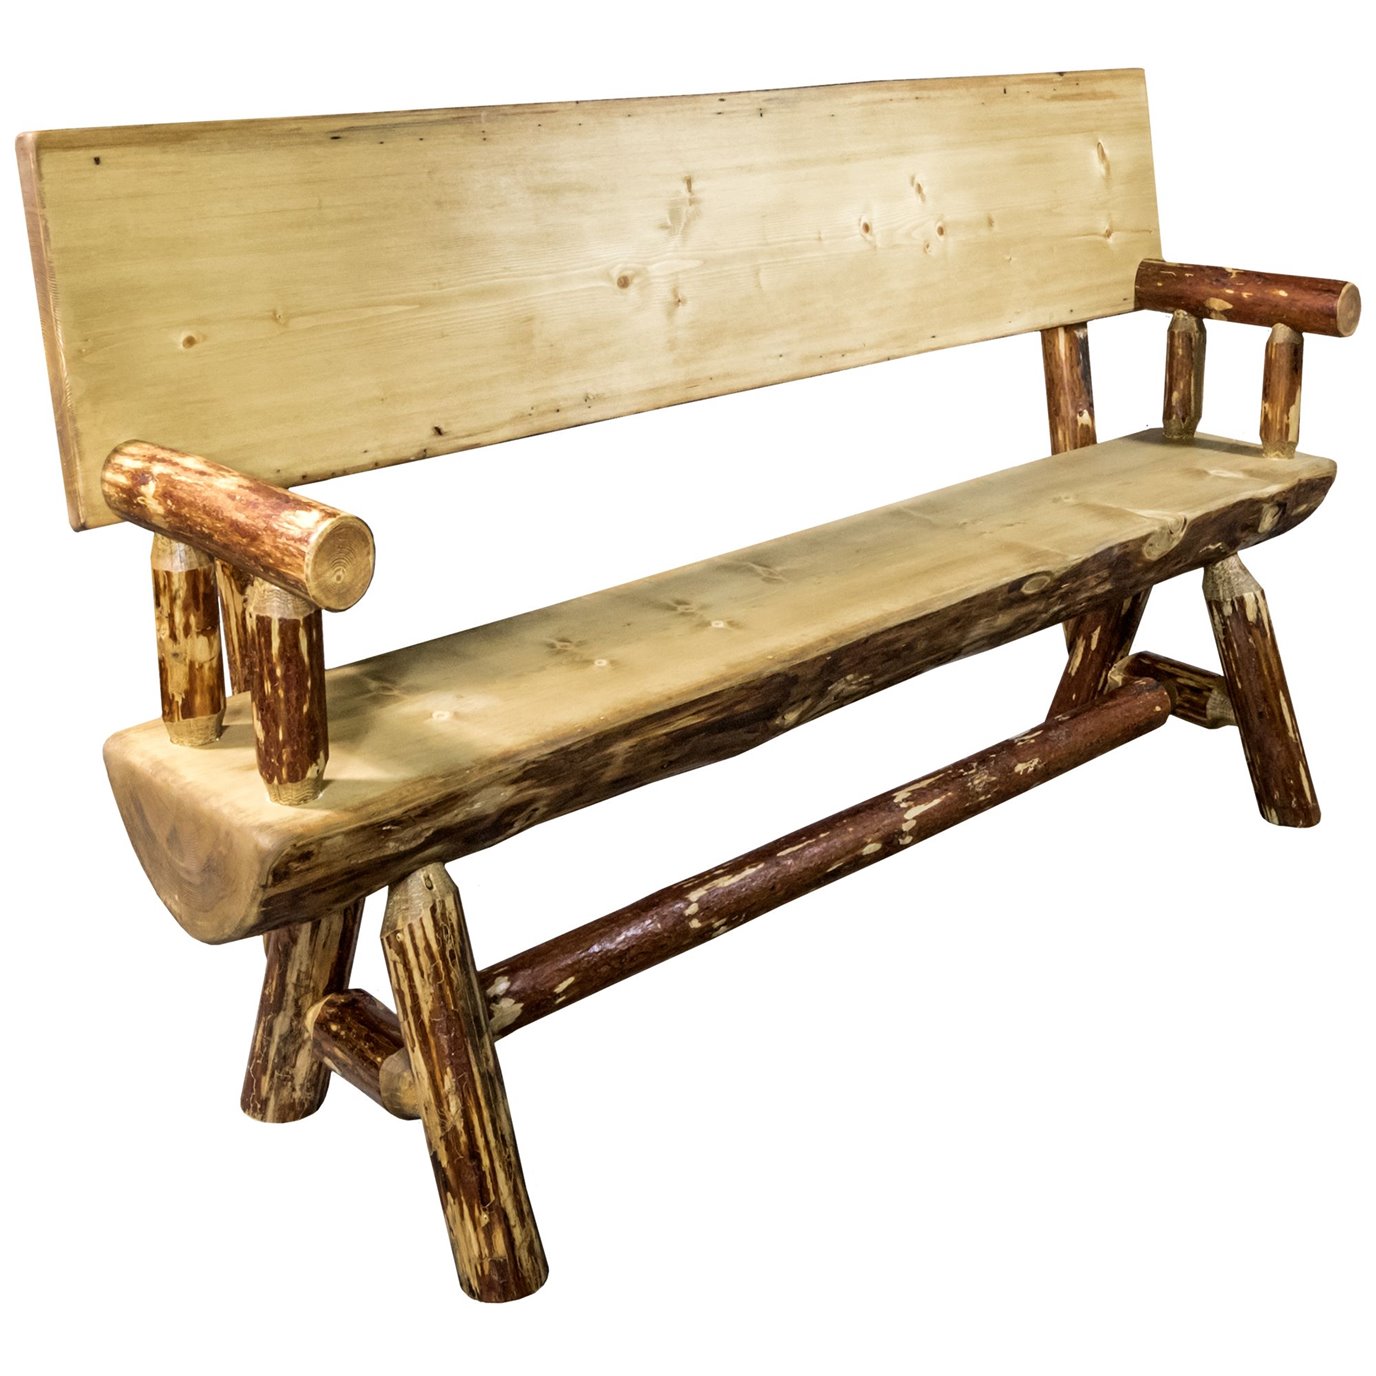 Glacier 5 Foot Half Log Bench w/ Back & Arms - Exterior Stain Finish